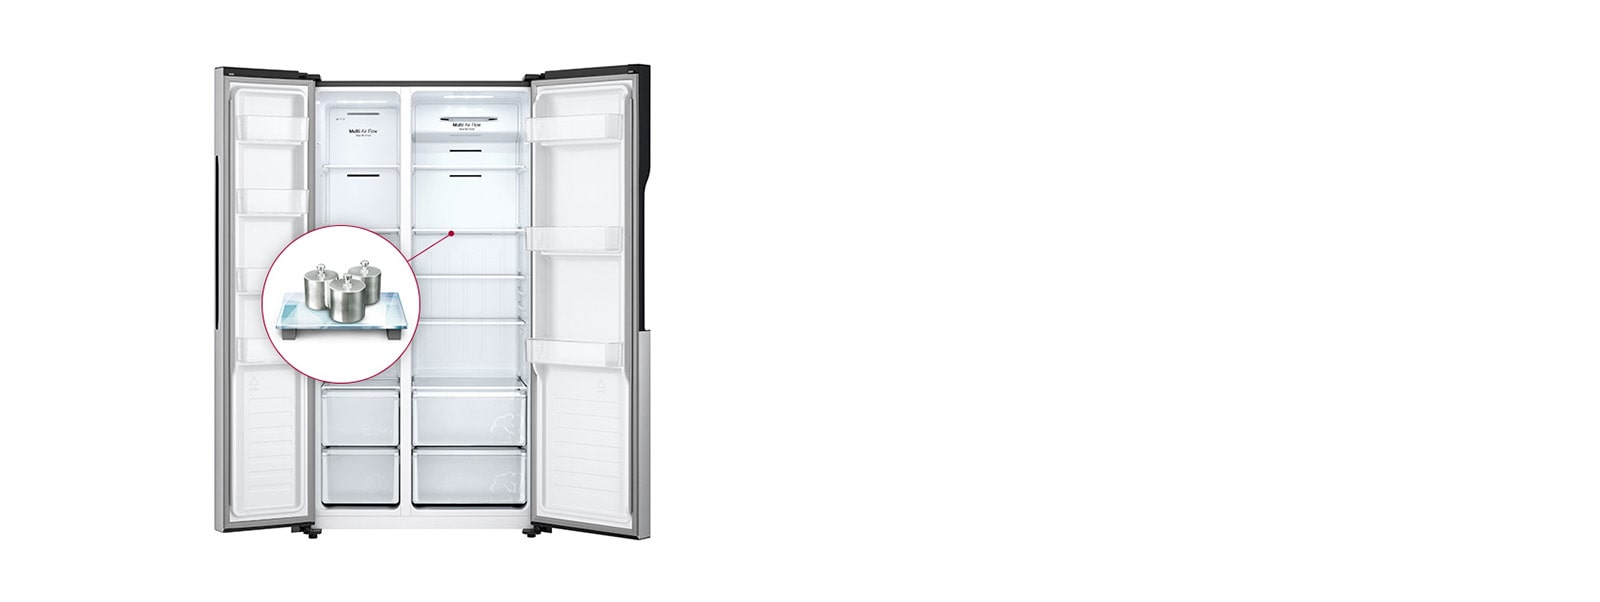 An image showing the entire interior of the refrigerator.